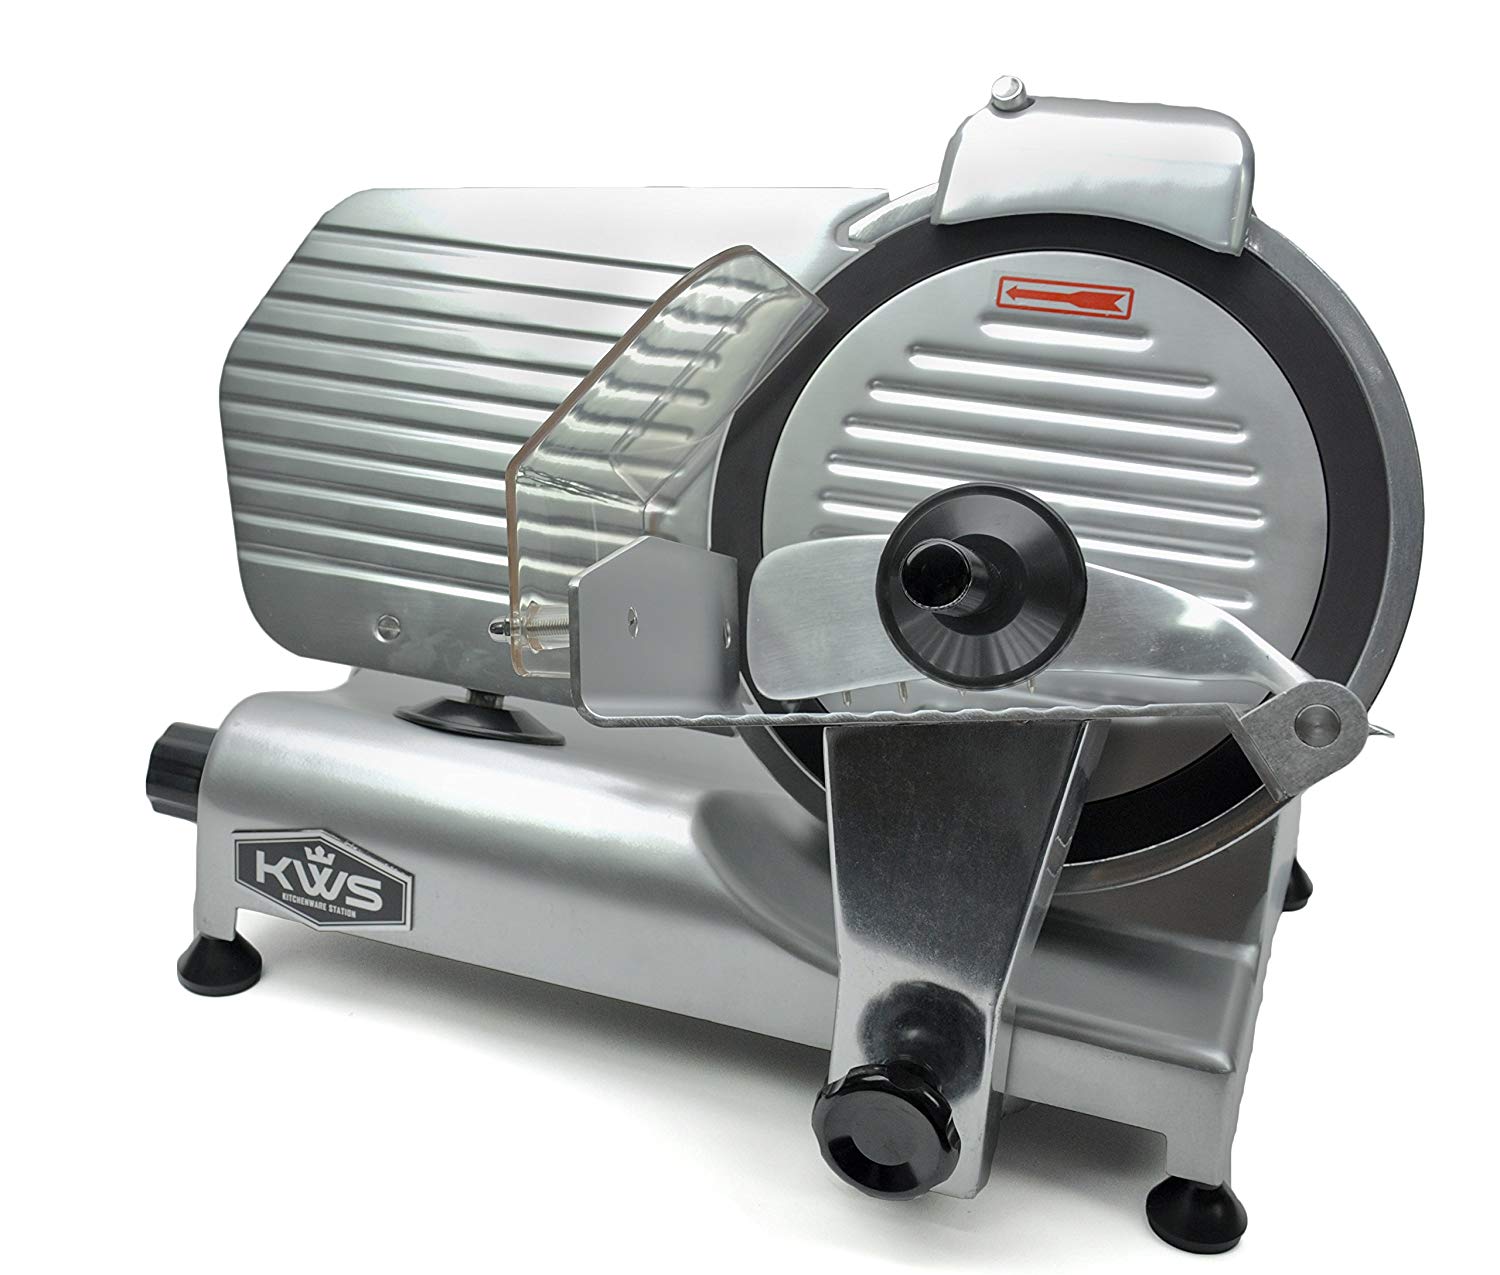  KWS Commercial 320w Electric Meat Slicer